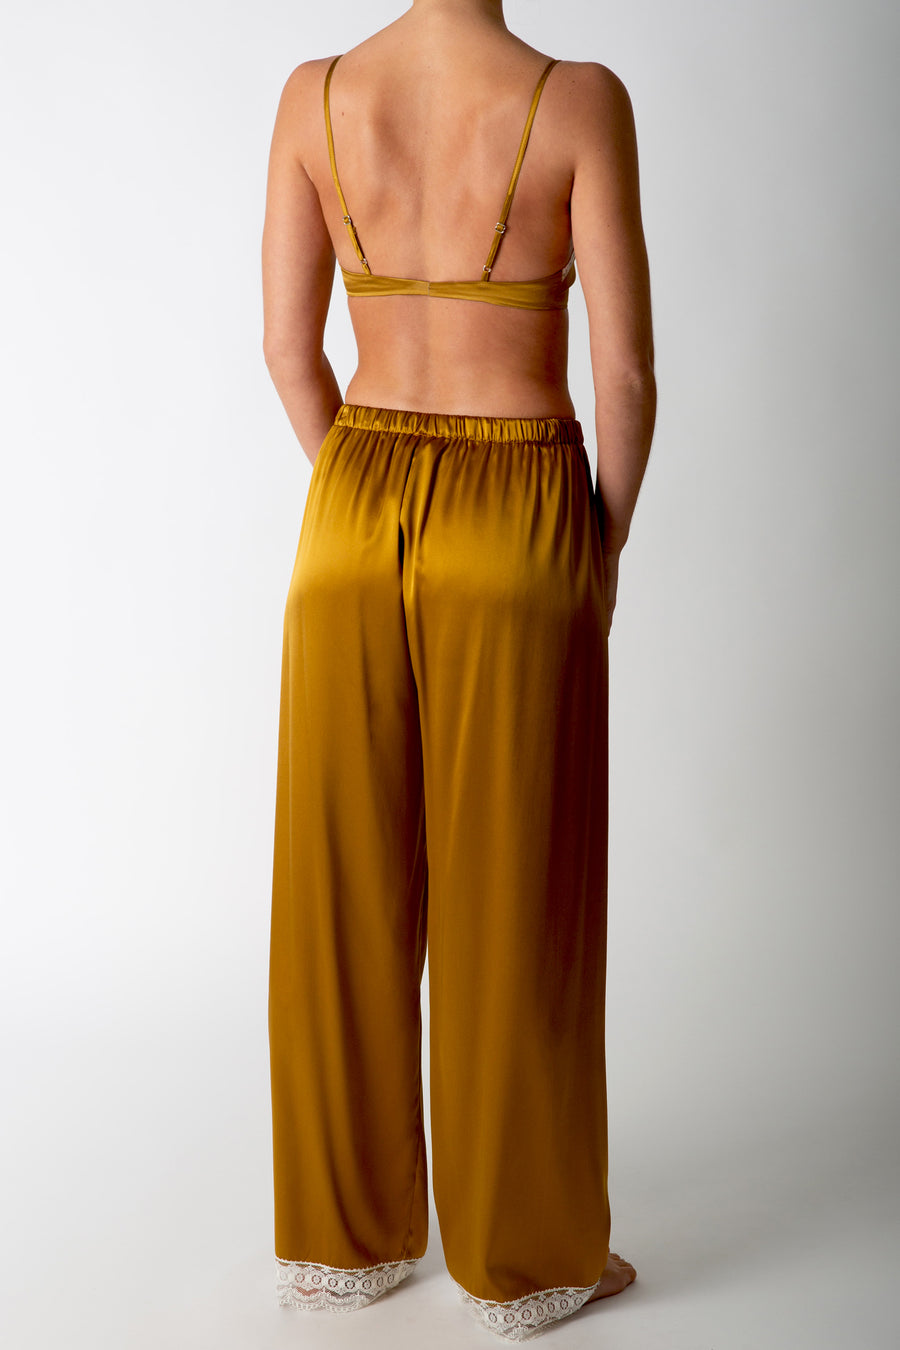 This is a back side photo of a woman wearing a silk gold bralette with matching pants.